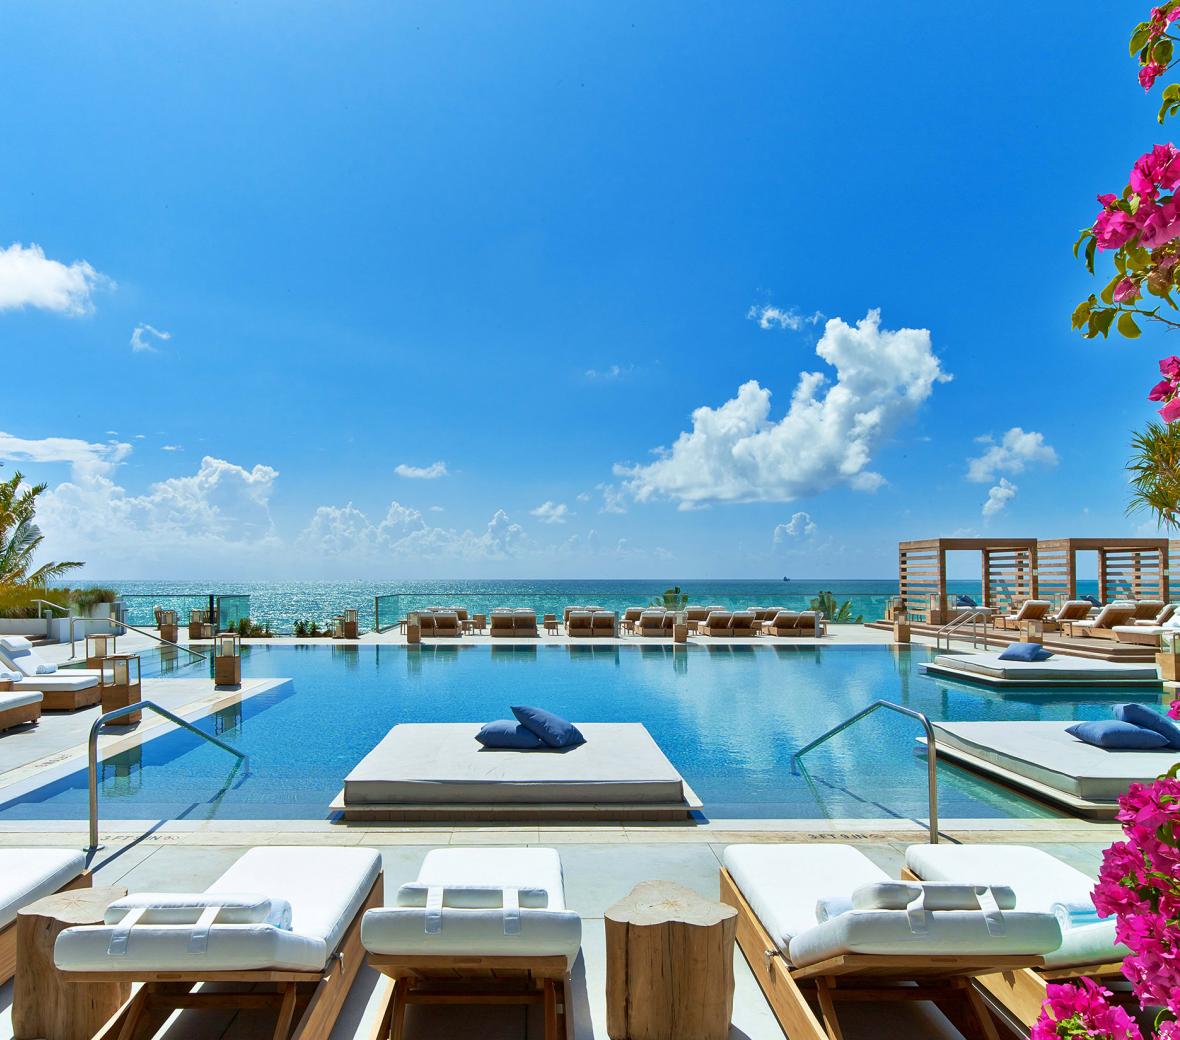 Luxury pool at a hotel by a beach in Miami with lounge chairs and cabanas.